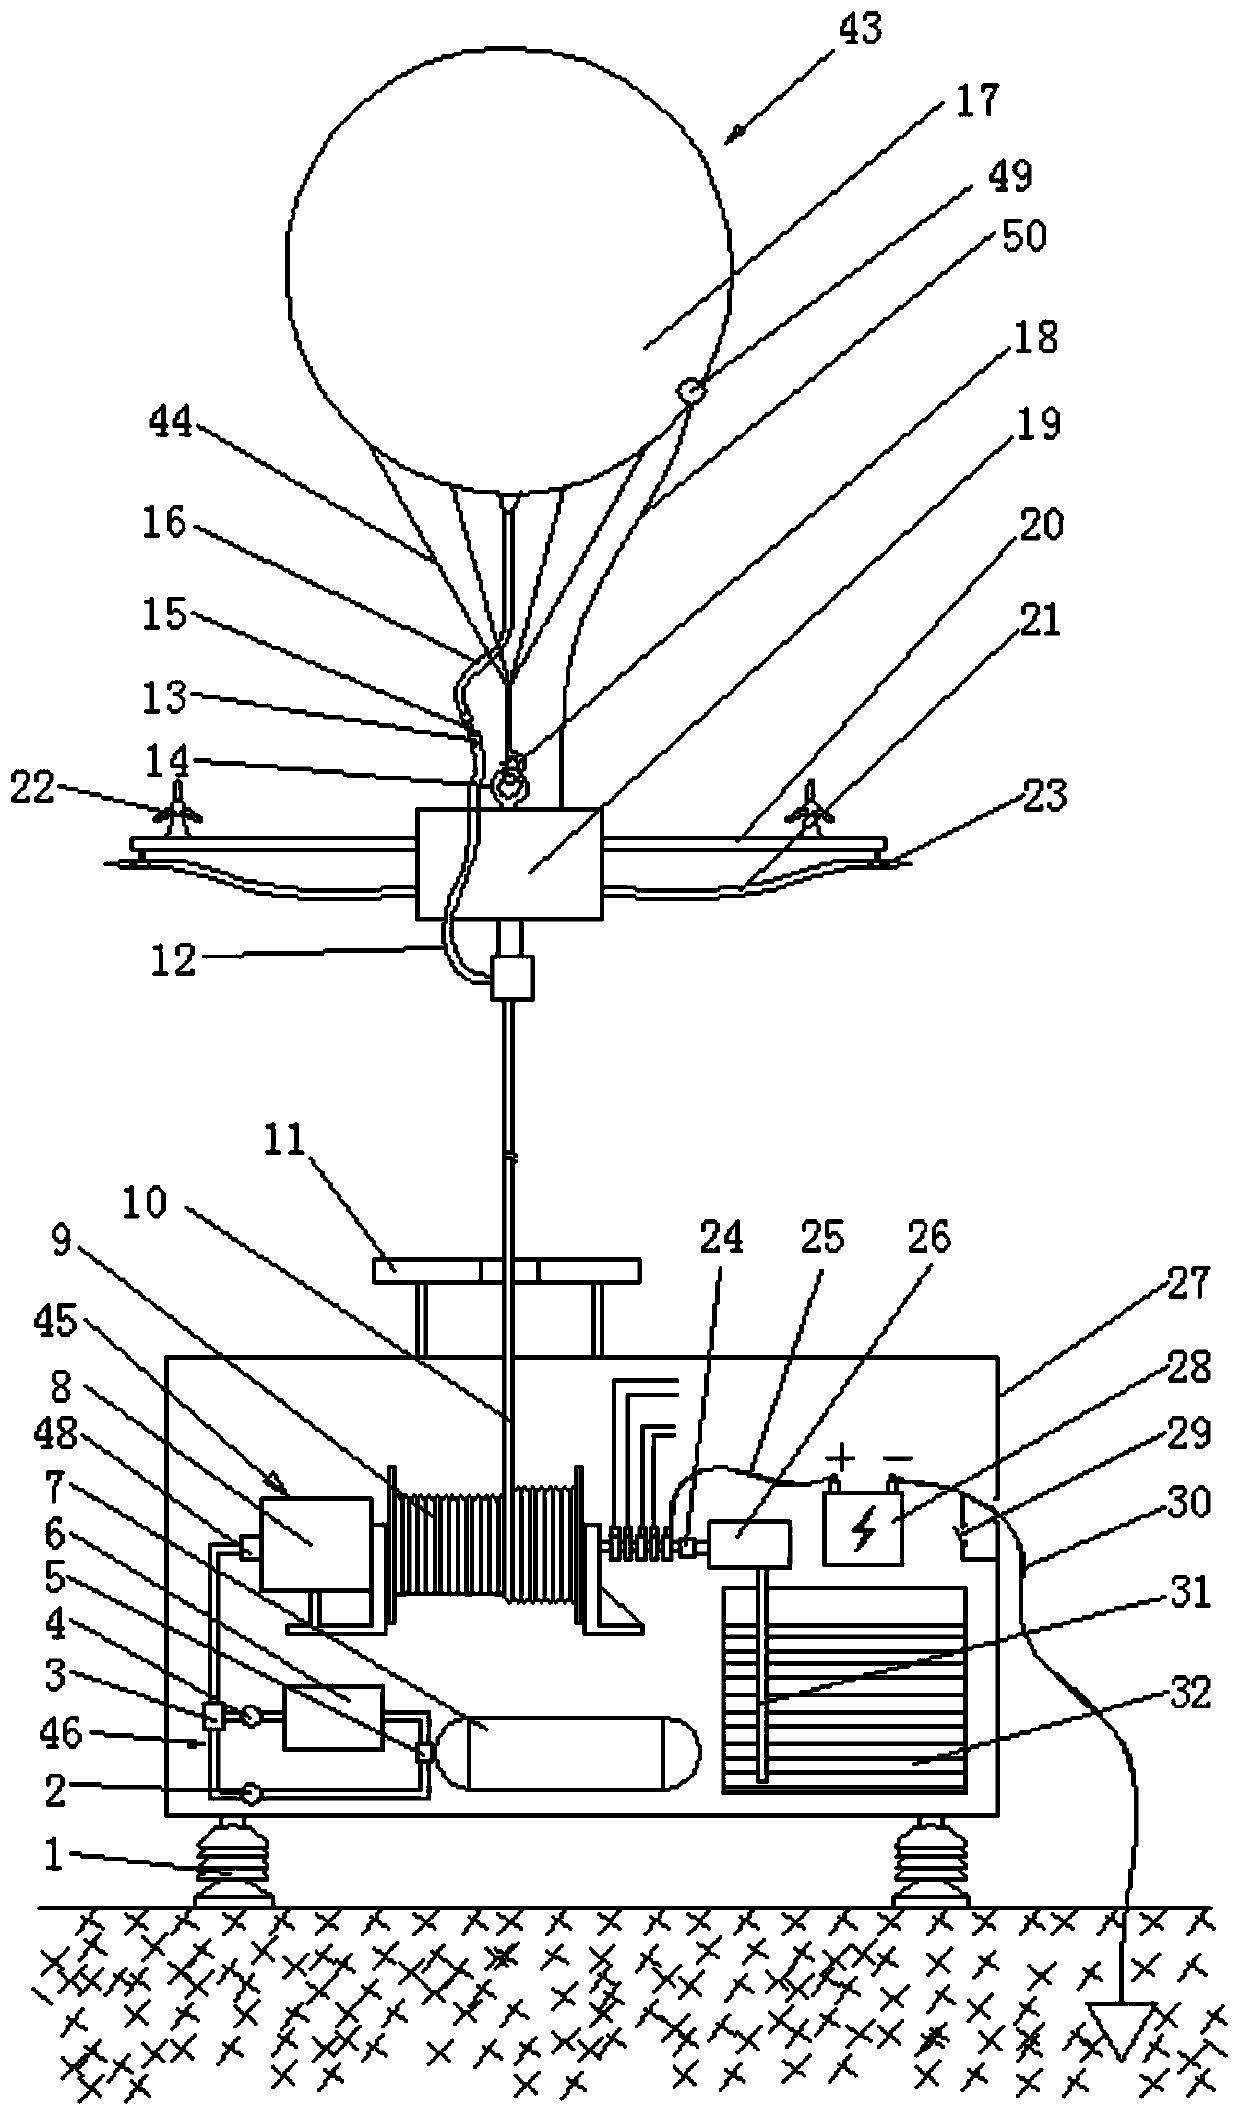 Haze removal device and method for spraying charged water at high altitude